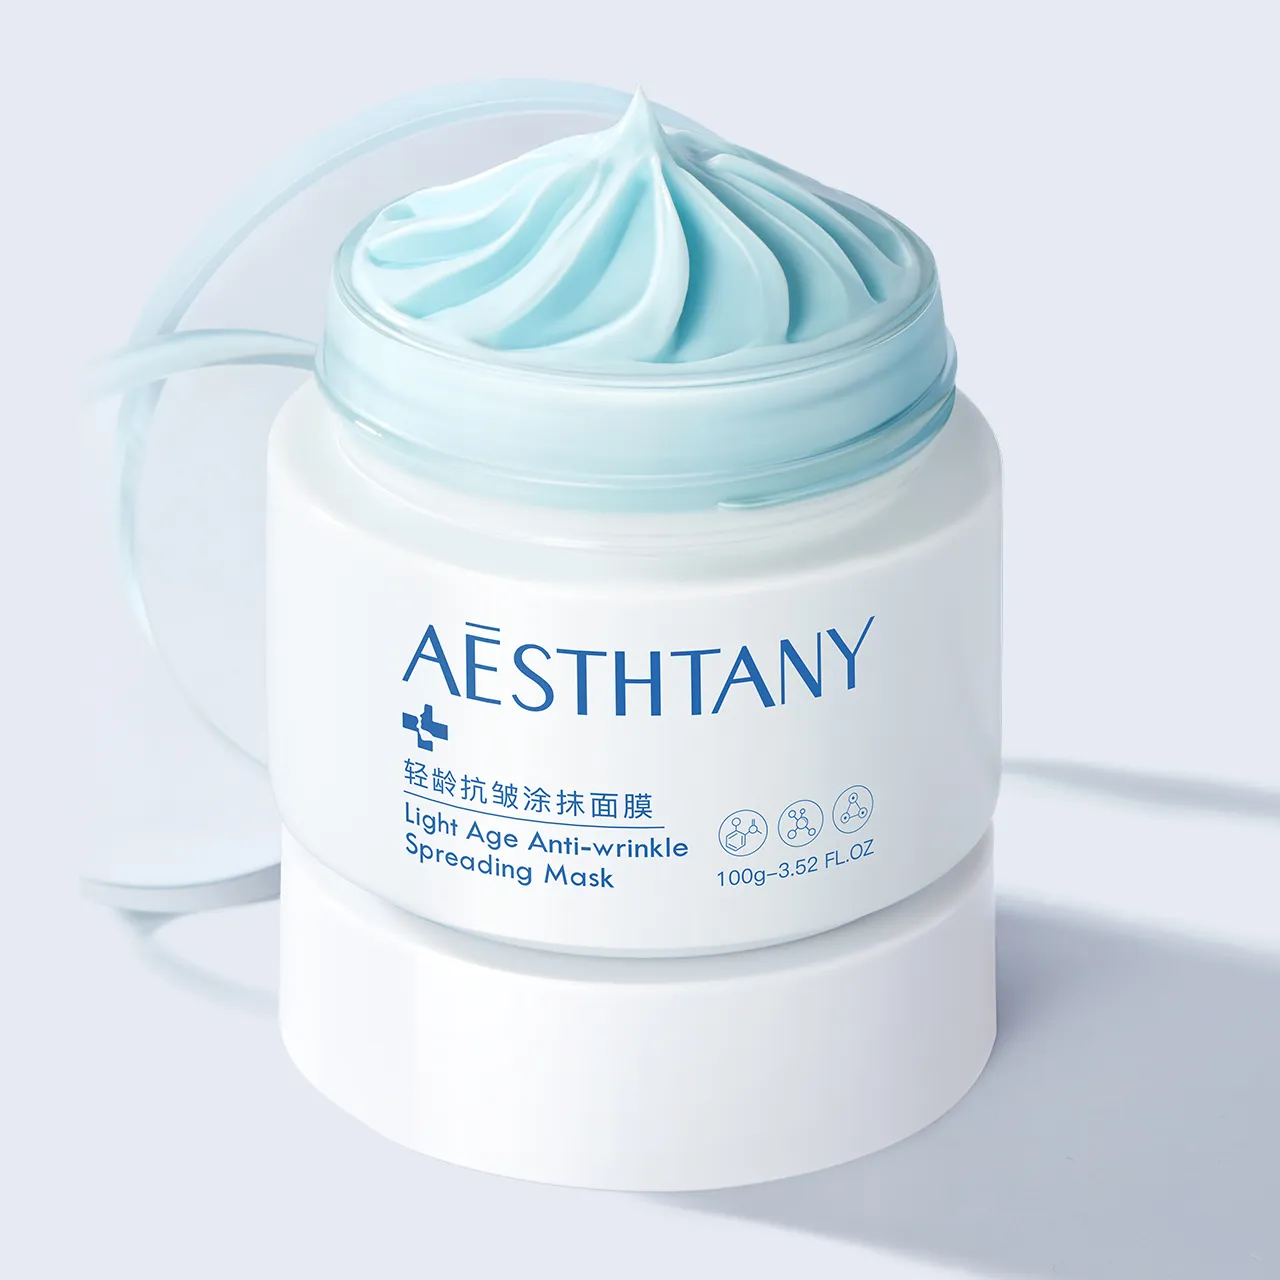 AESTHTANY Beauty Product Organic Pore Shrinking Clay Mask Face Mask Light Anti-wrinkle Mud Clay Facial Mask